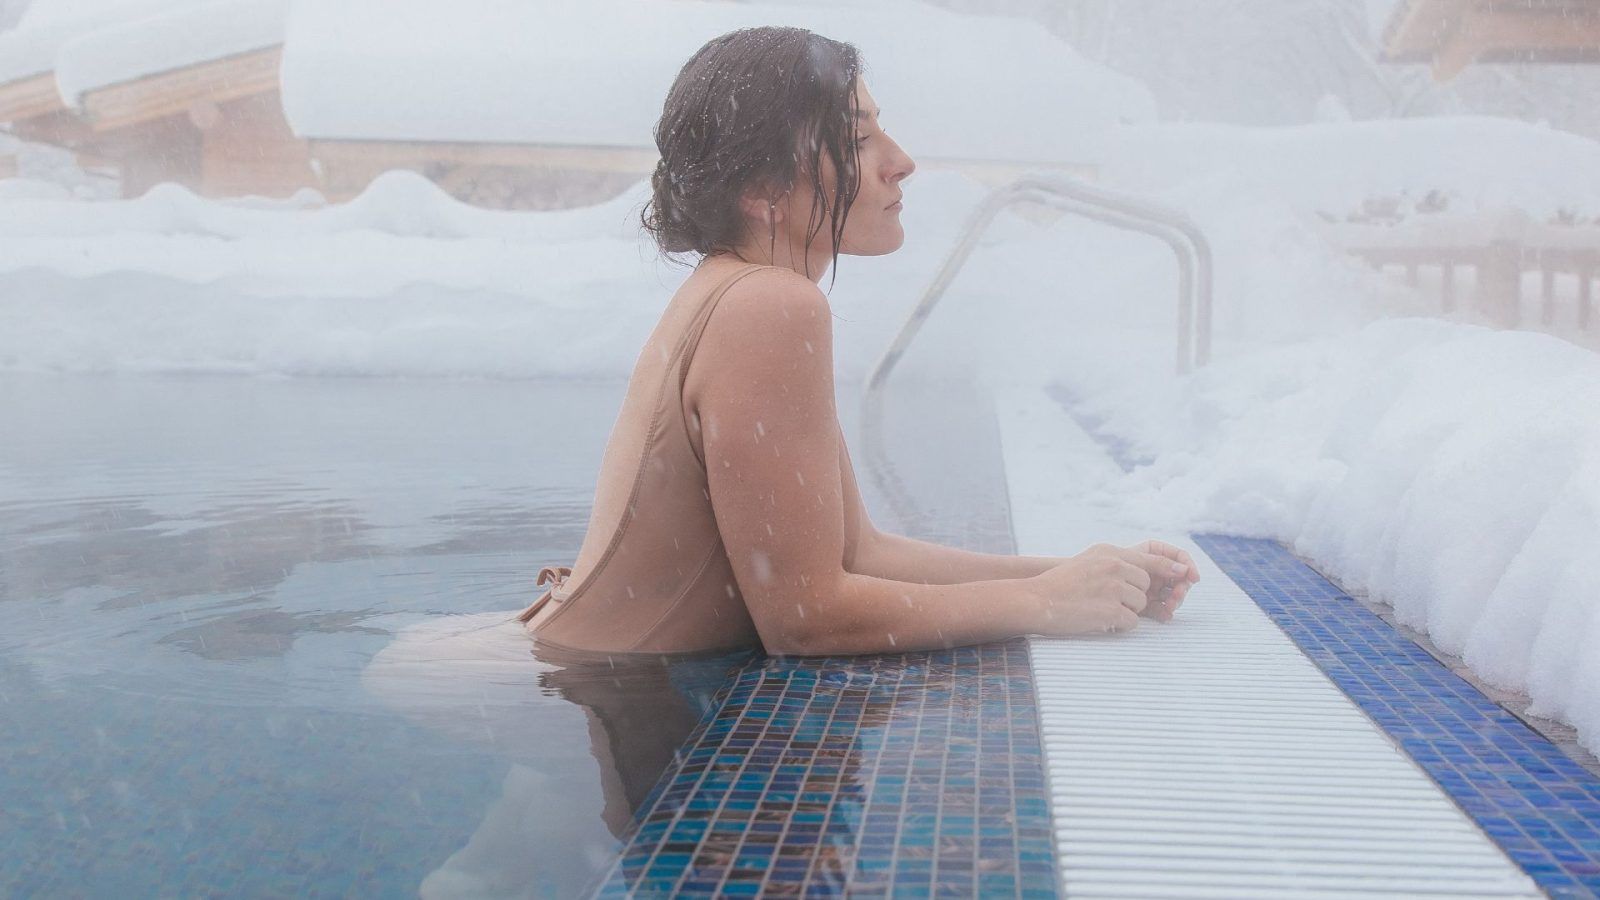 An Ice Bath Plunge May Just Revive Your Body, Here's Where to Go